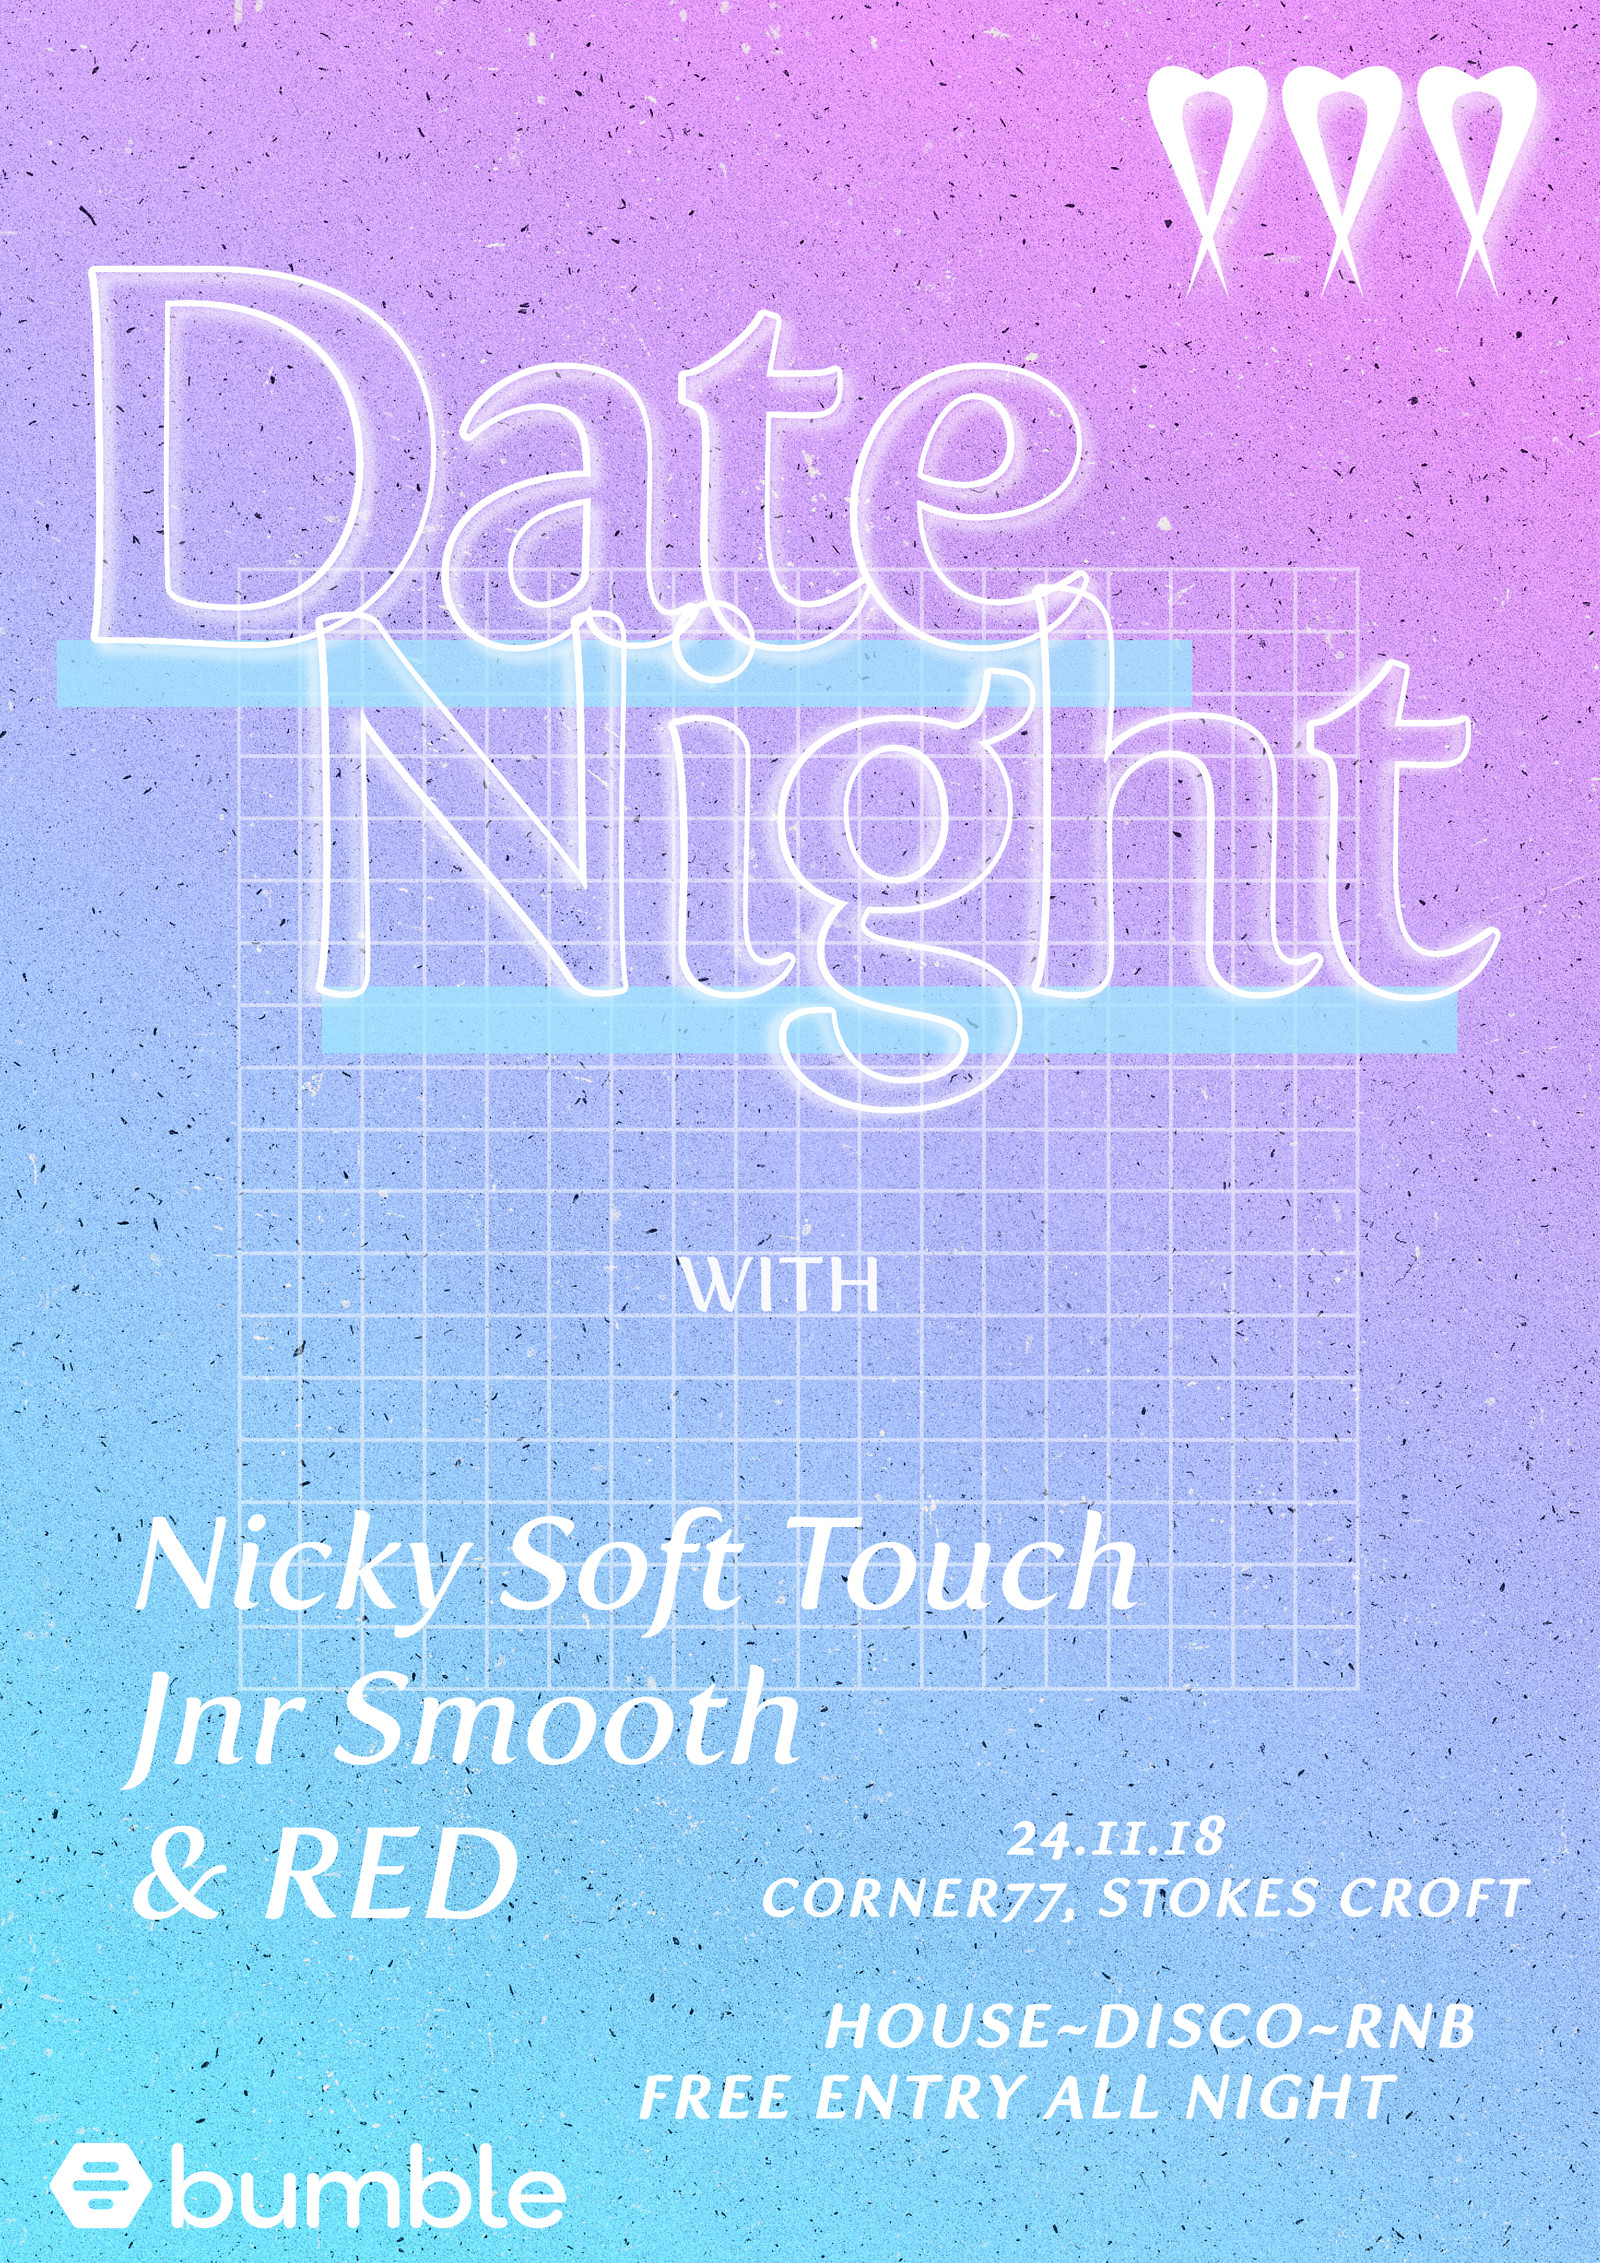 Date Night W/ Nicky Soft Touch, Jnr Smooth & Red at Corner 77